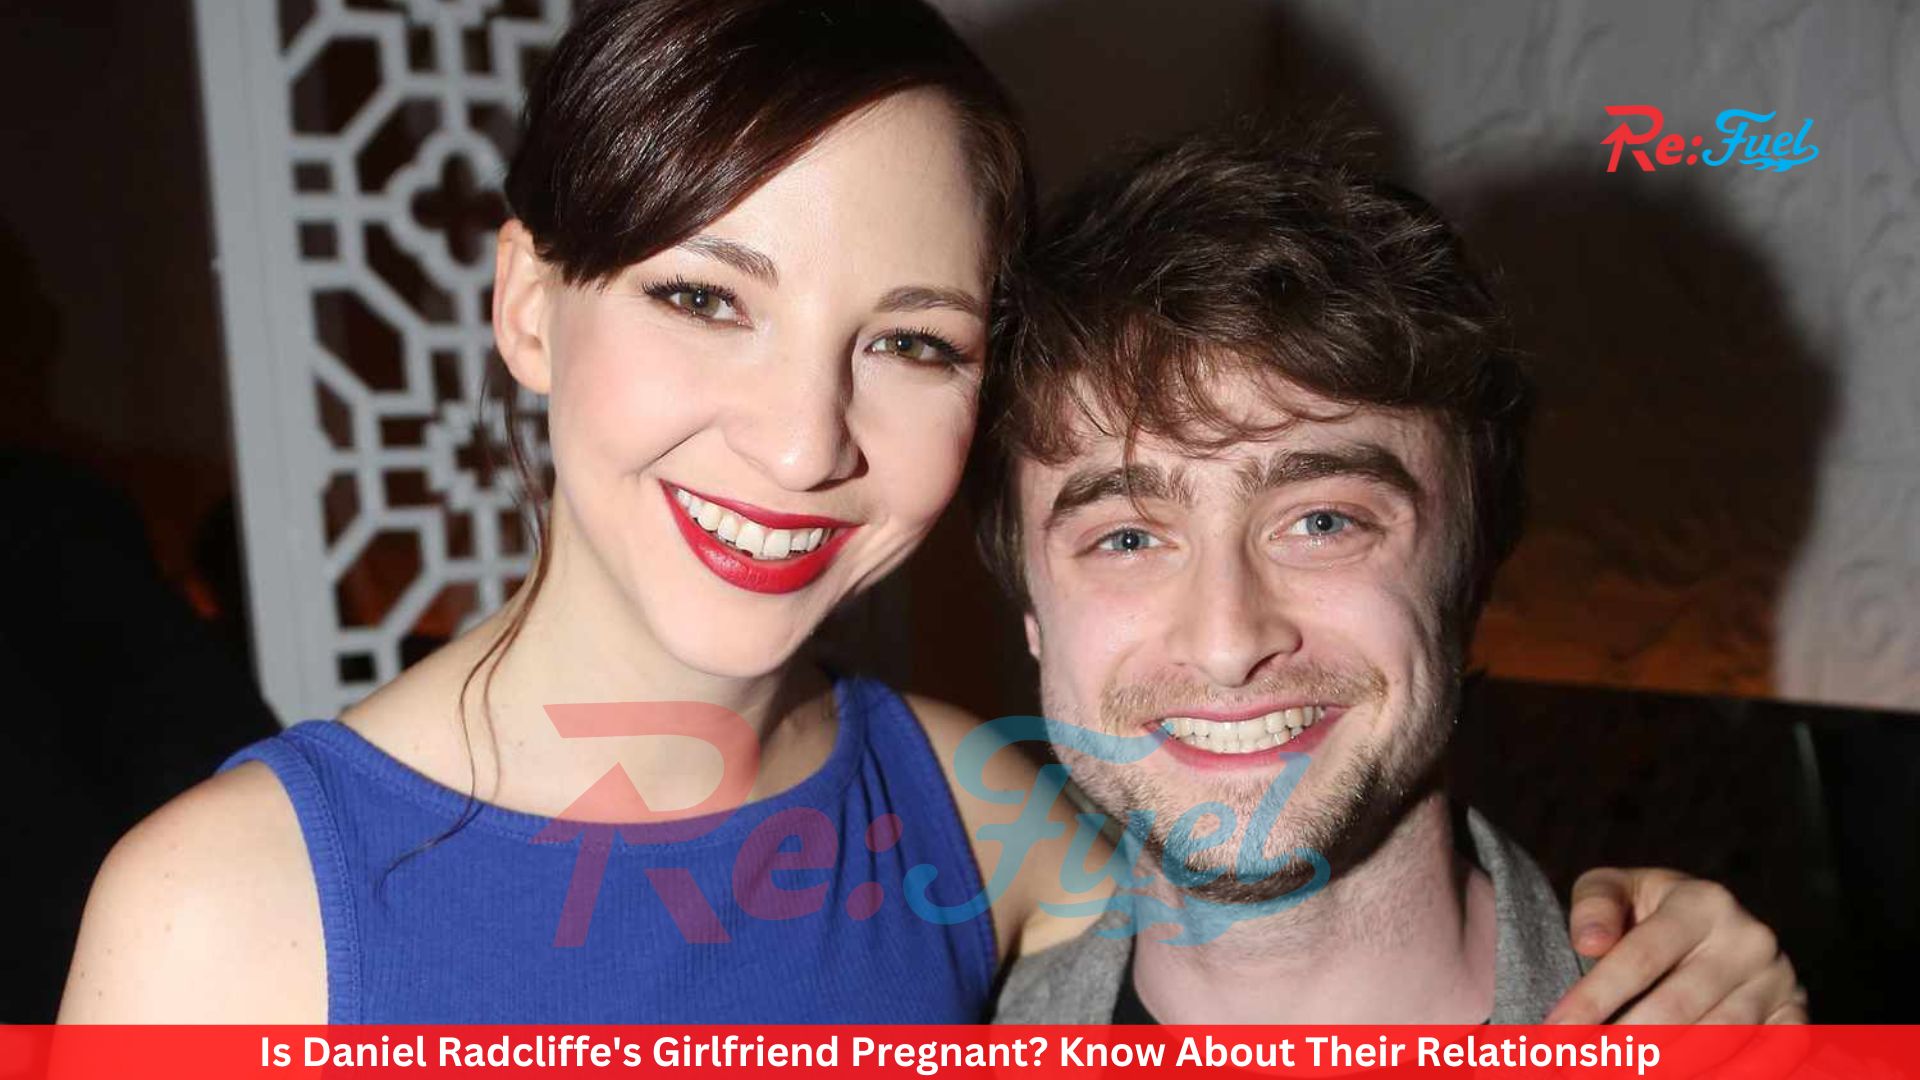 Is Daniel Radcliffe's Girlfriend Pregnant? Know About Their Relationship